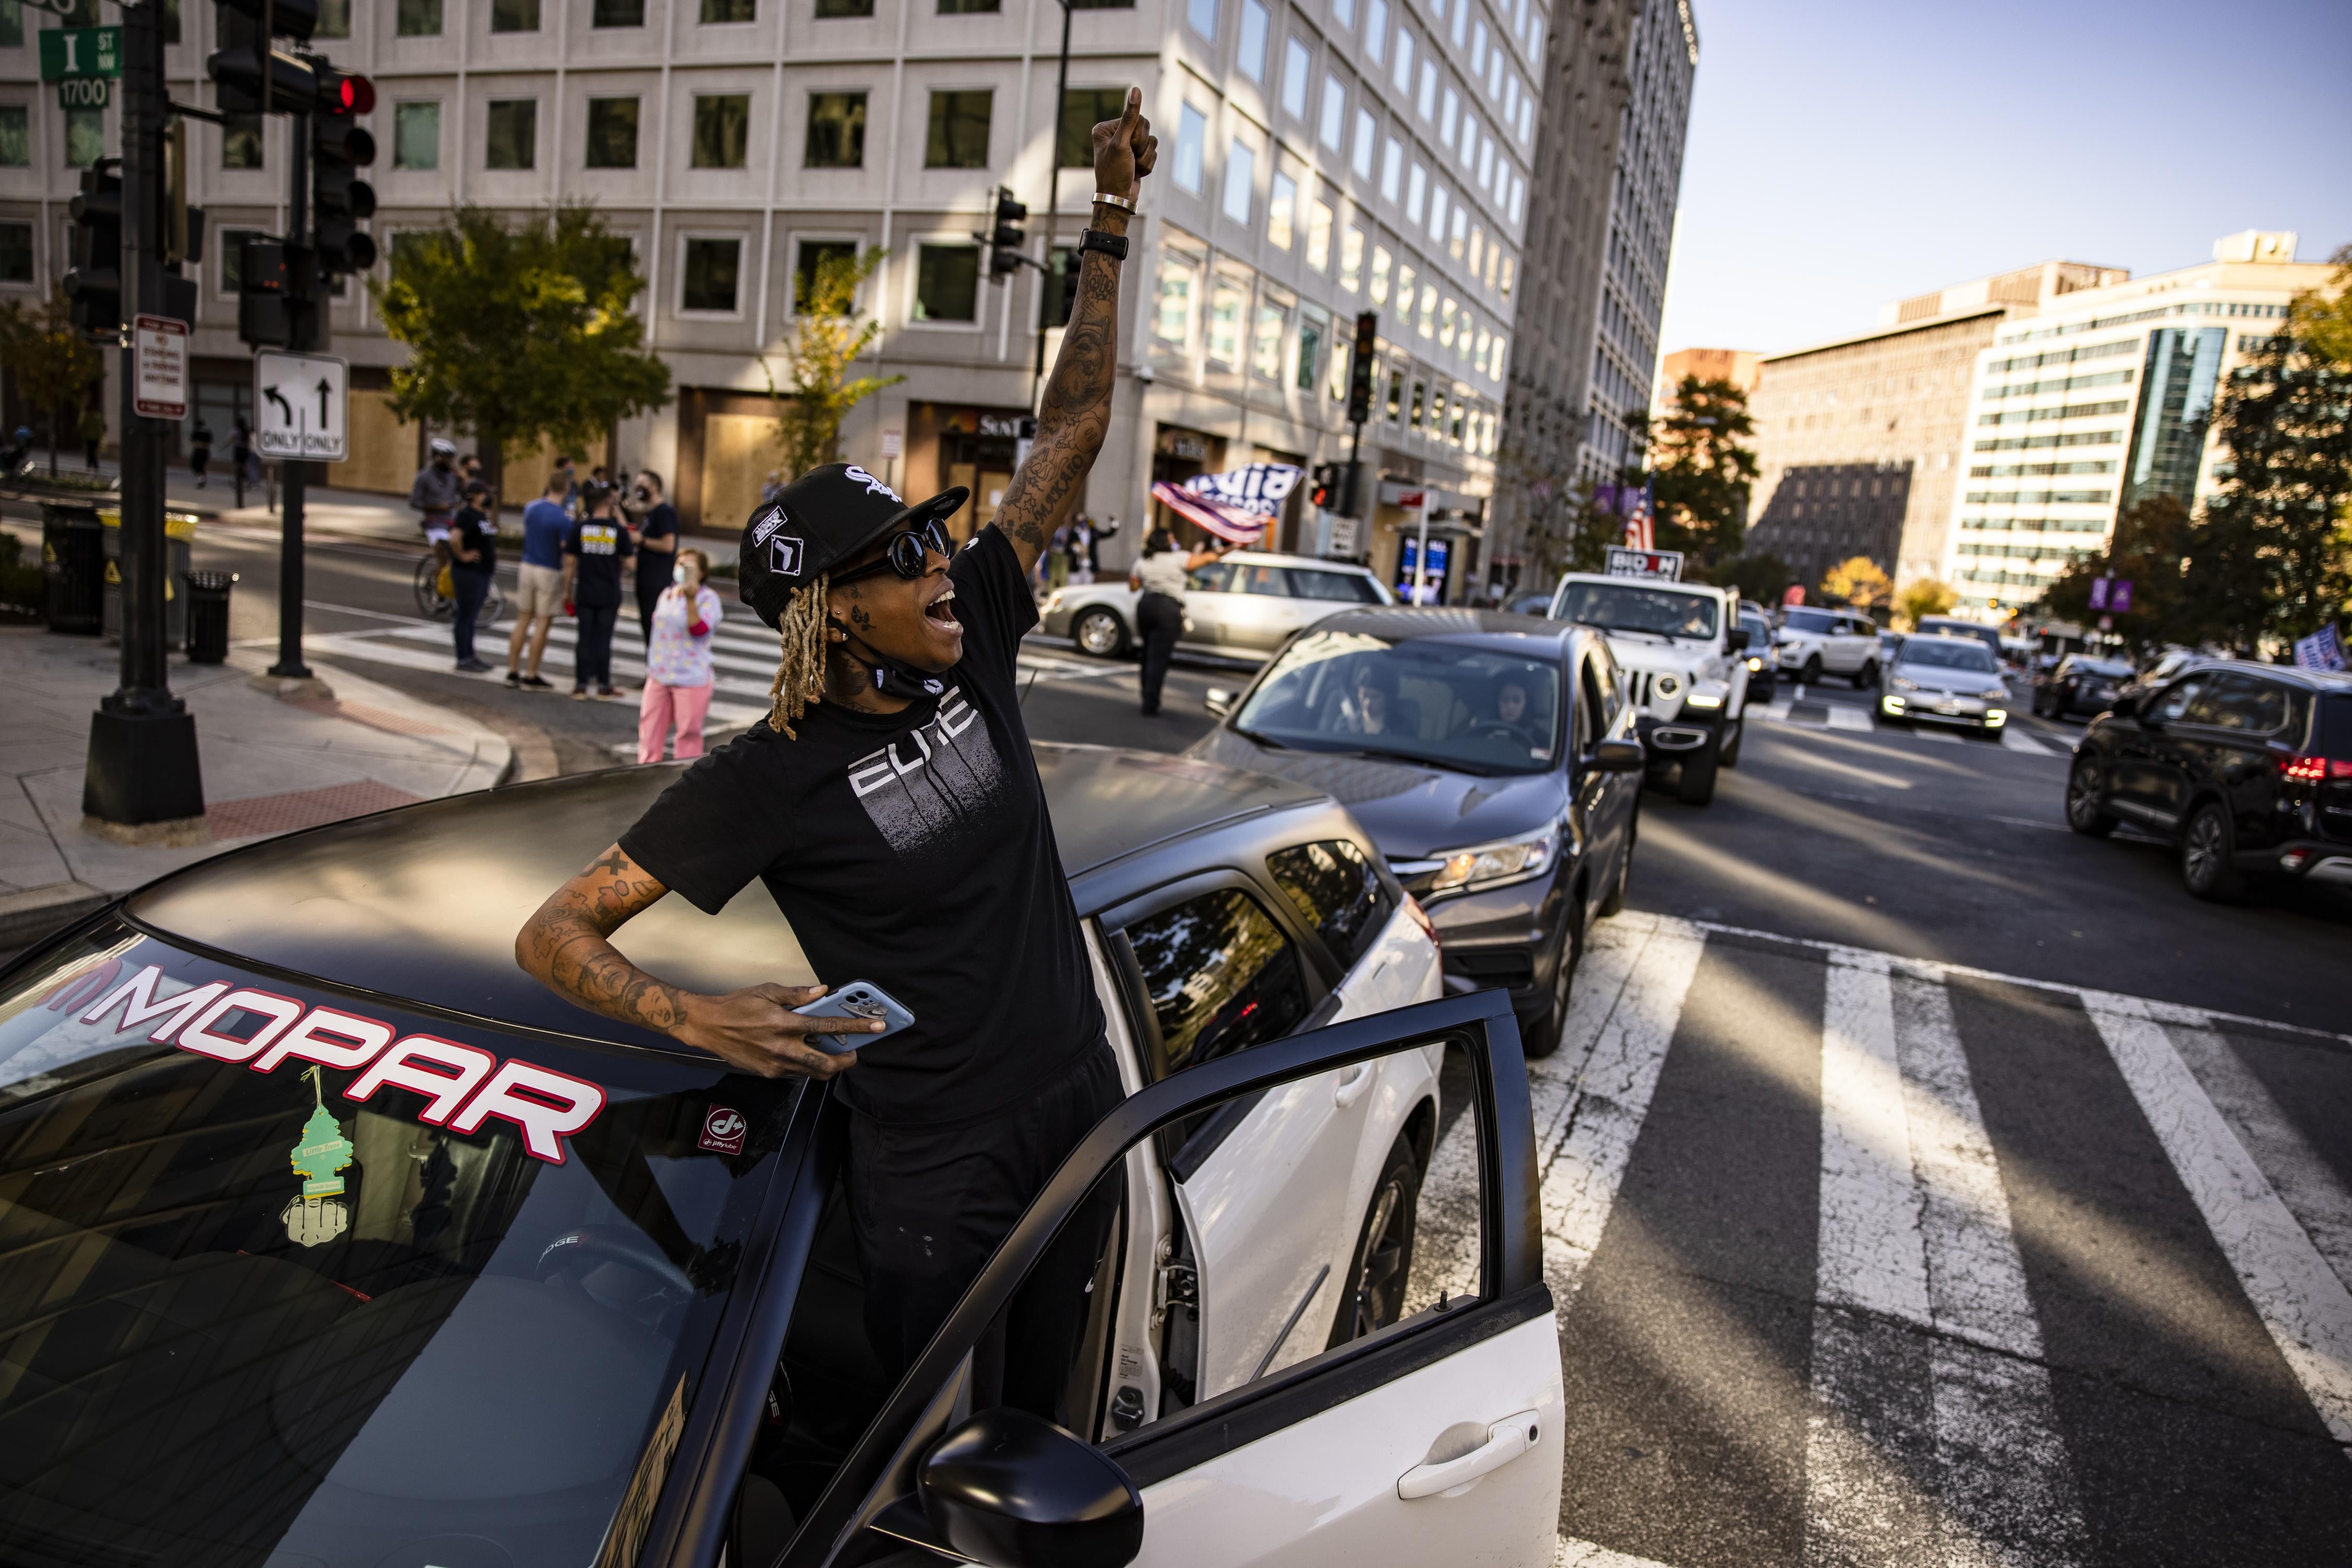 A person standing just out of their car raises their fist into the air in downtown Washington, DC.